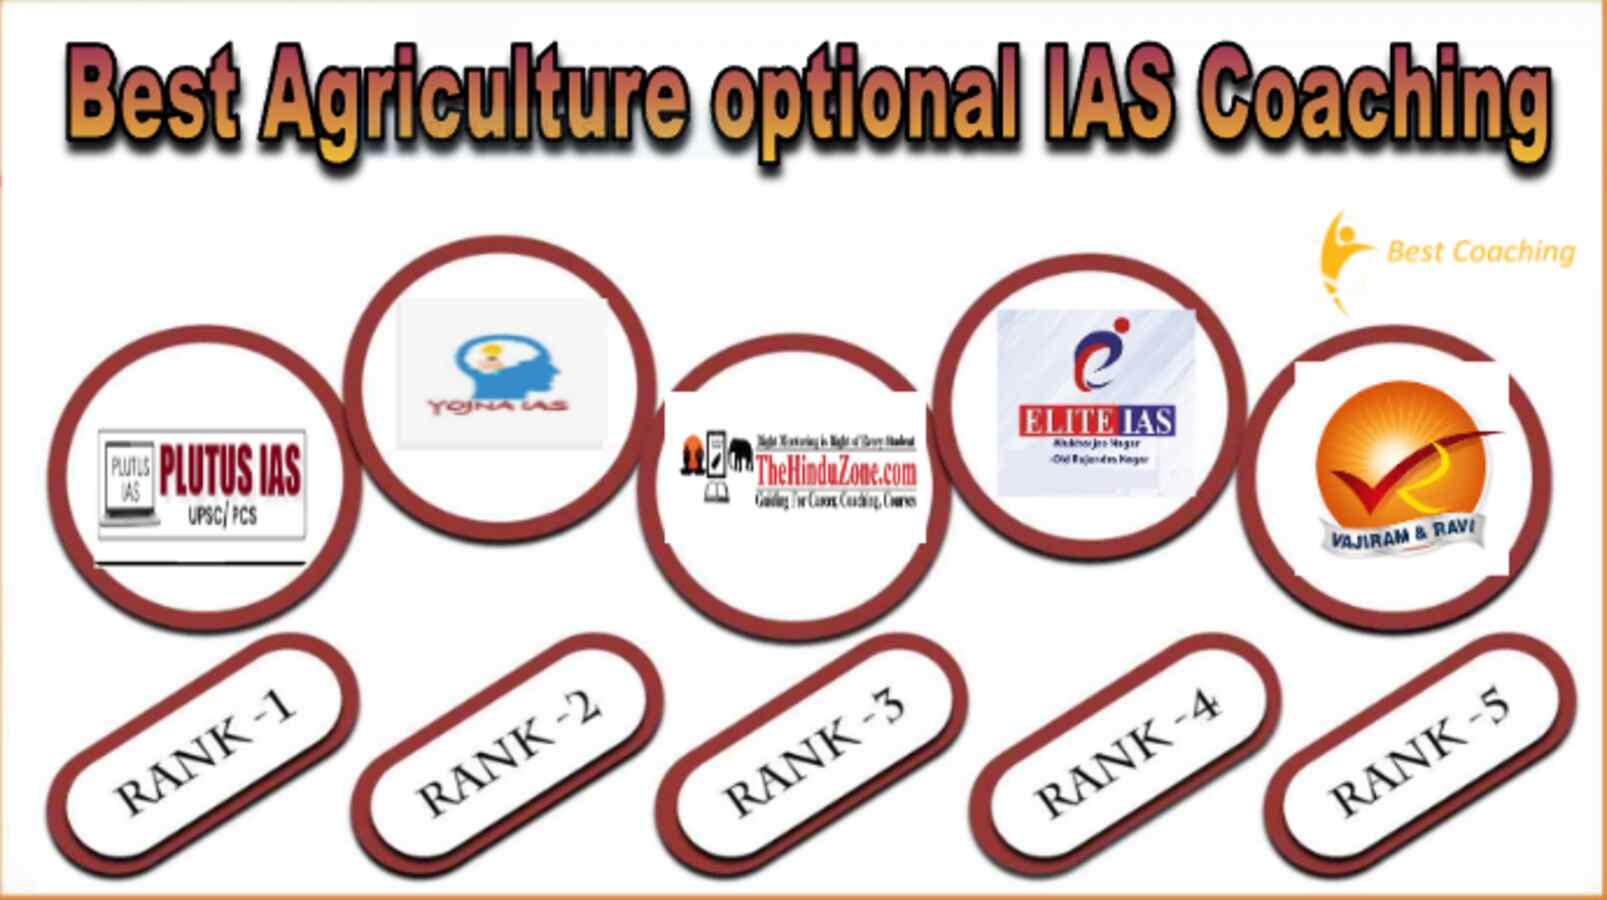 Best Agriculture optional IAS coaching